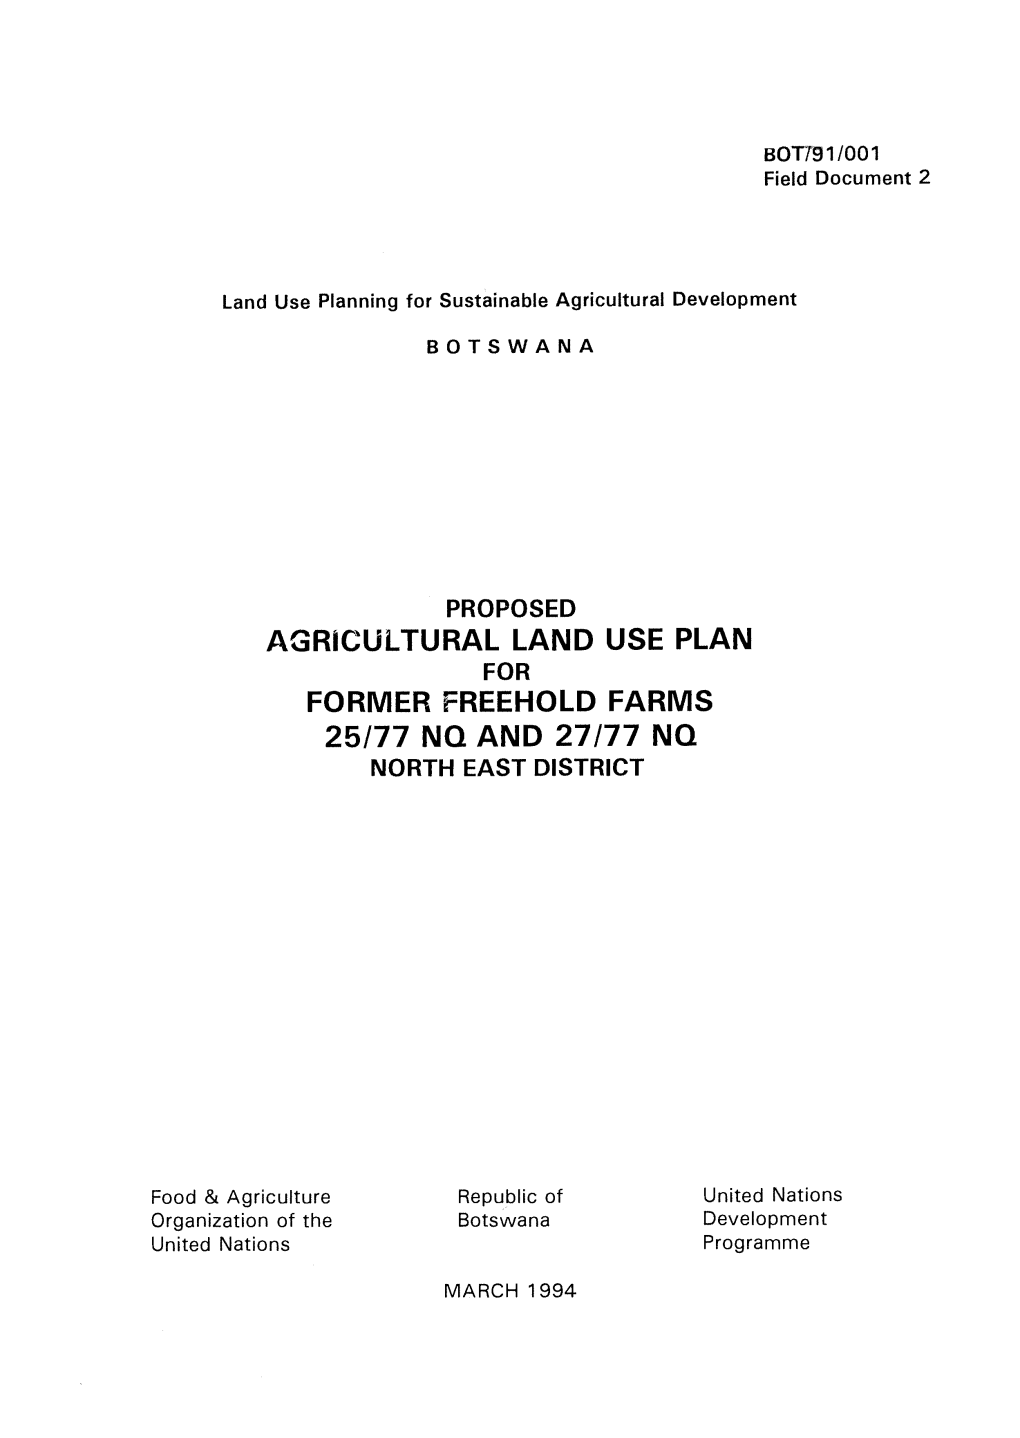 Proposed Agricultural Land Use Plan for Former Freehold Farms 25/77 Nq and 27/77 Nq North East District